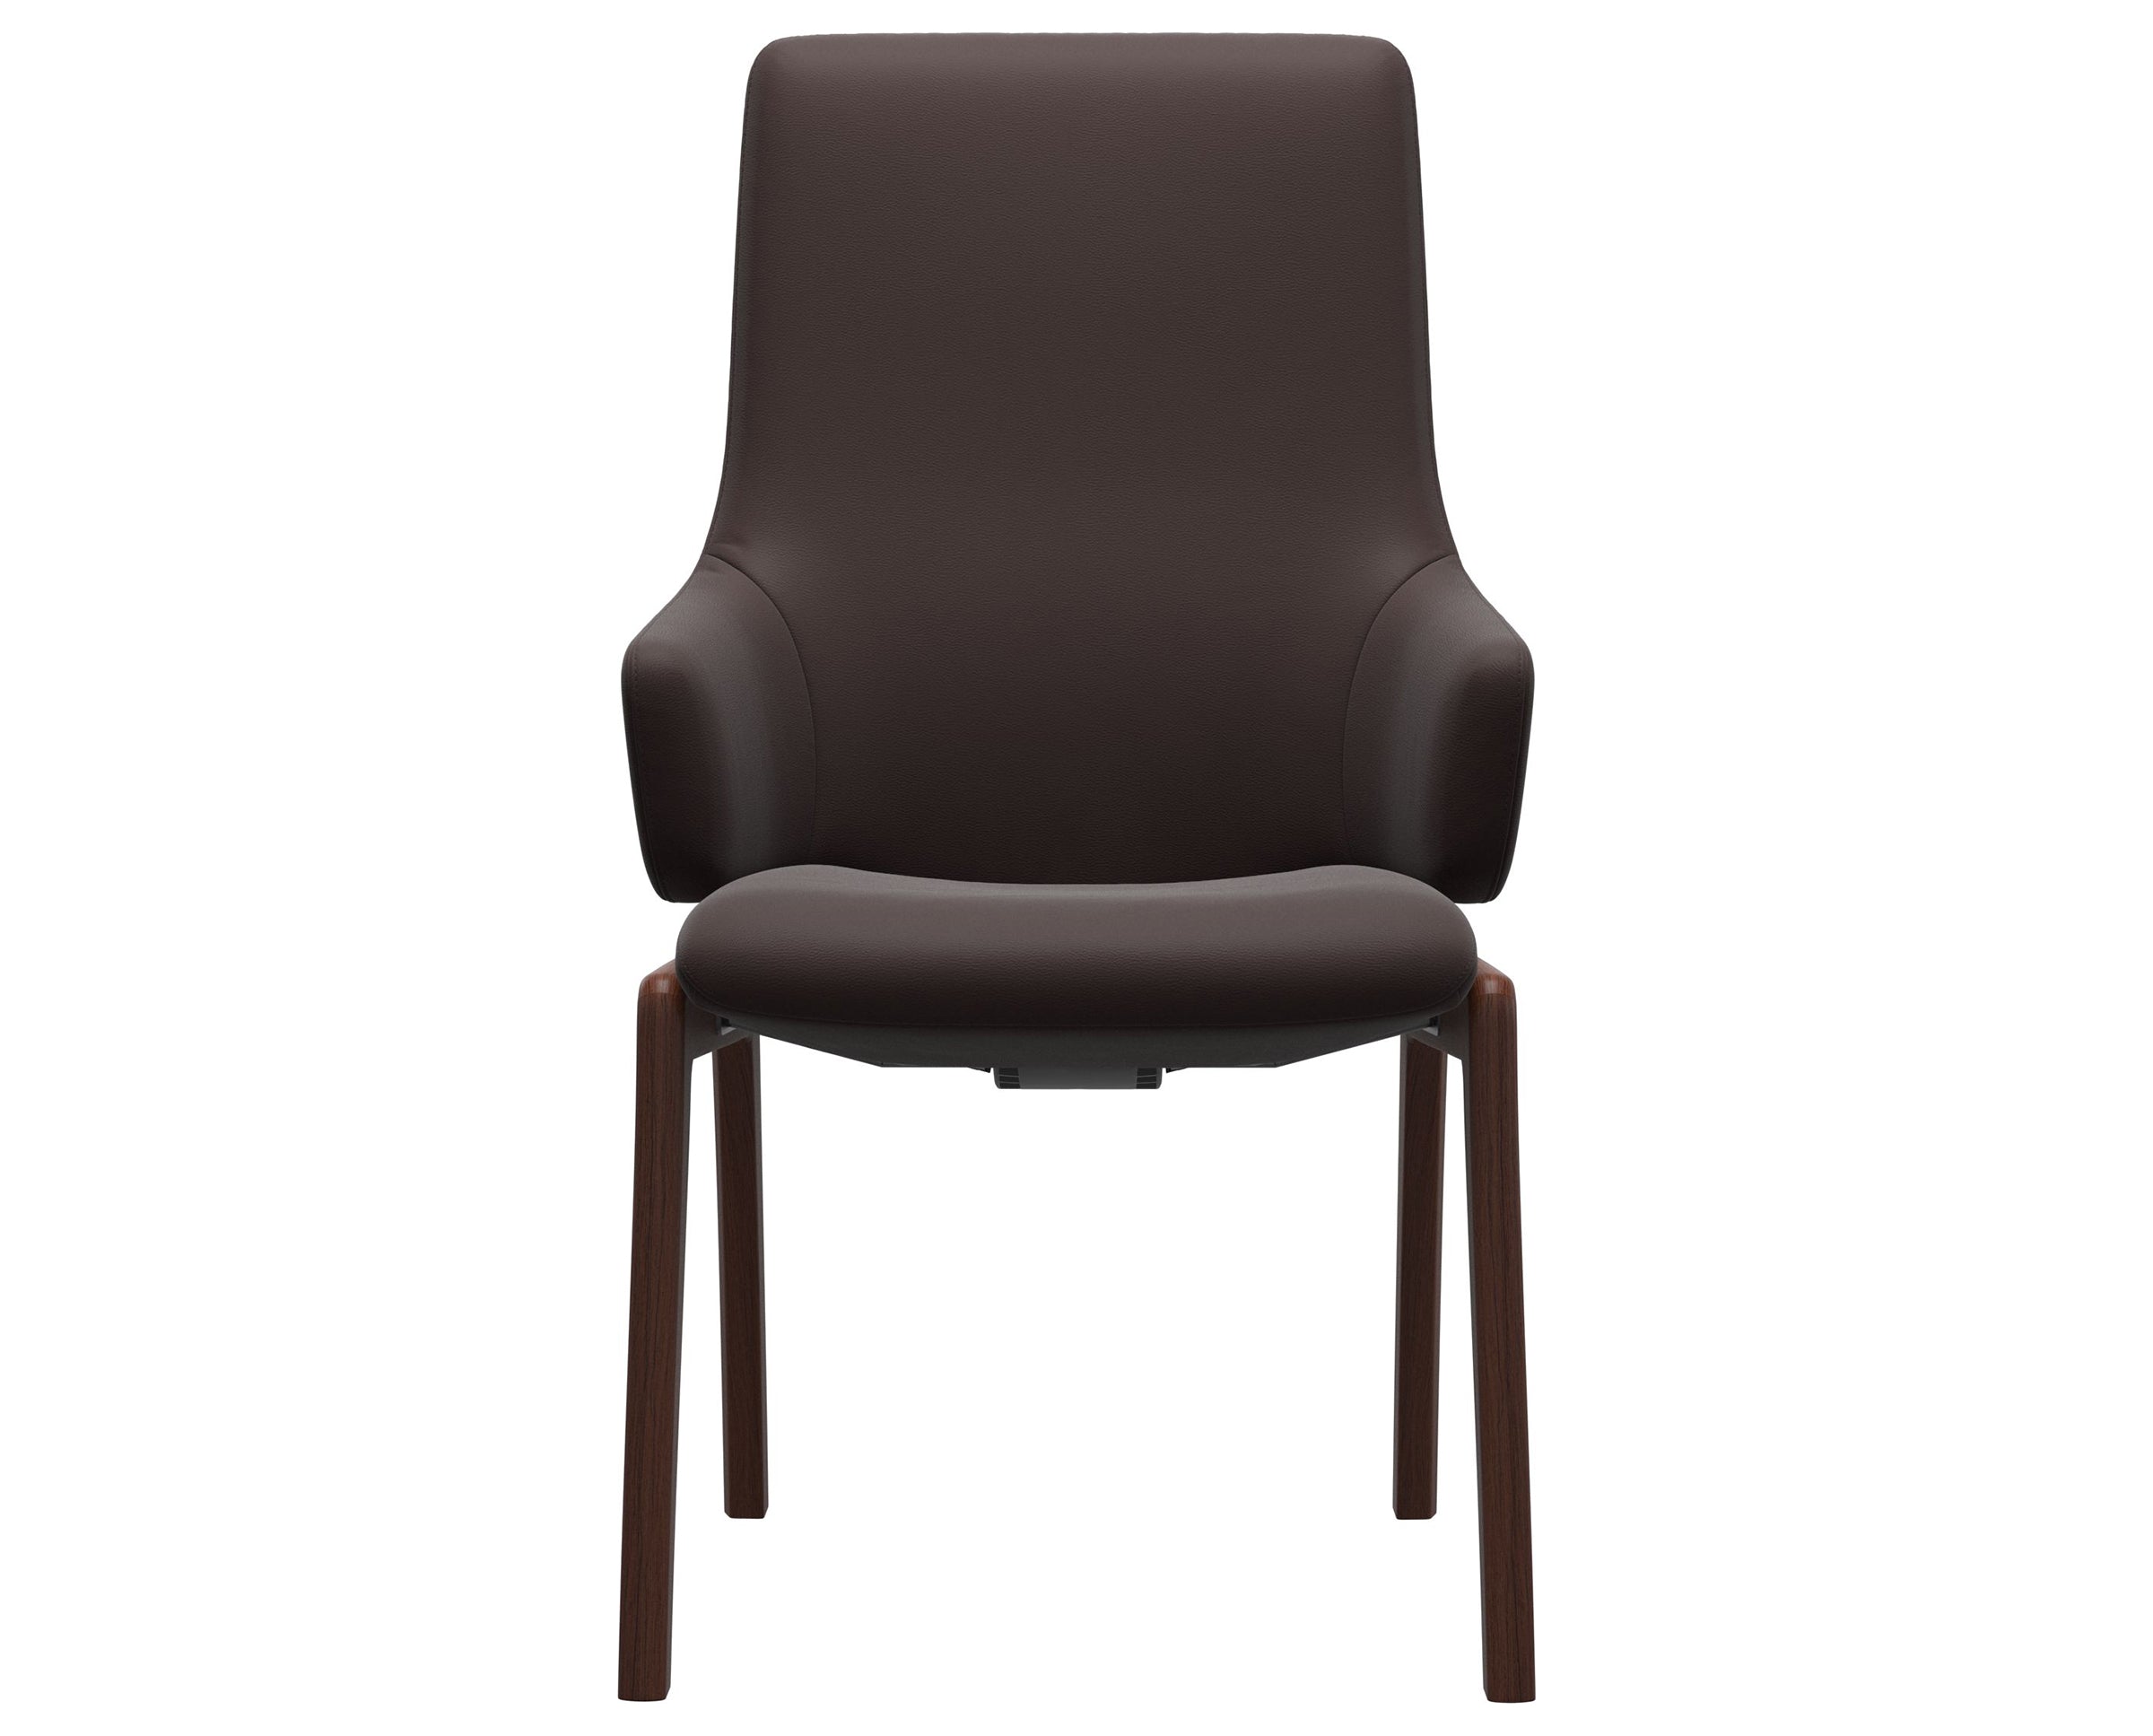 Paloma Leather Chocolate and Walnut Base | Stressless Laurel High Back D100 Dining Chair w/Arms | Valley Ridge Furniture